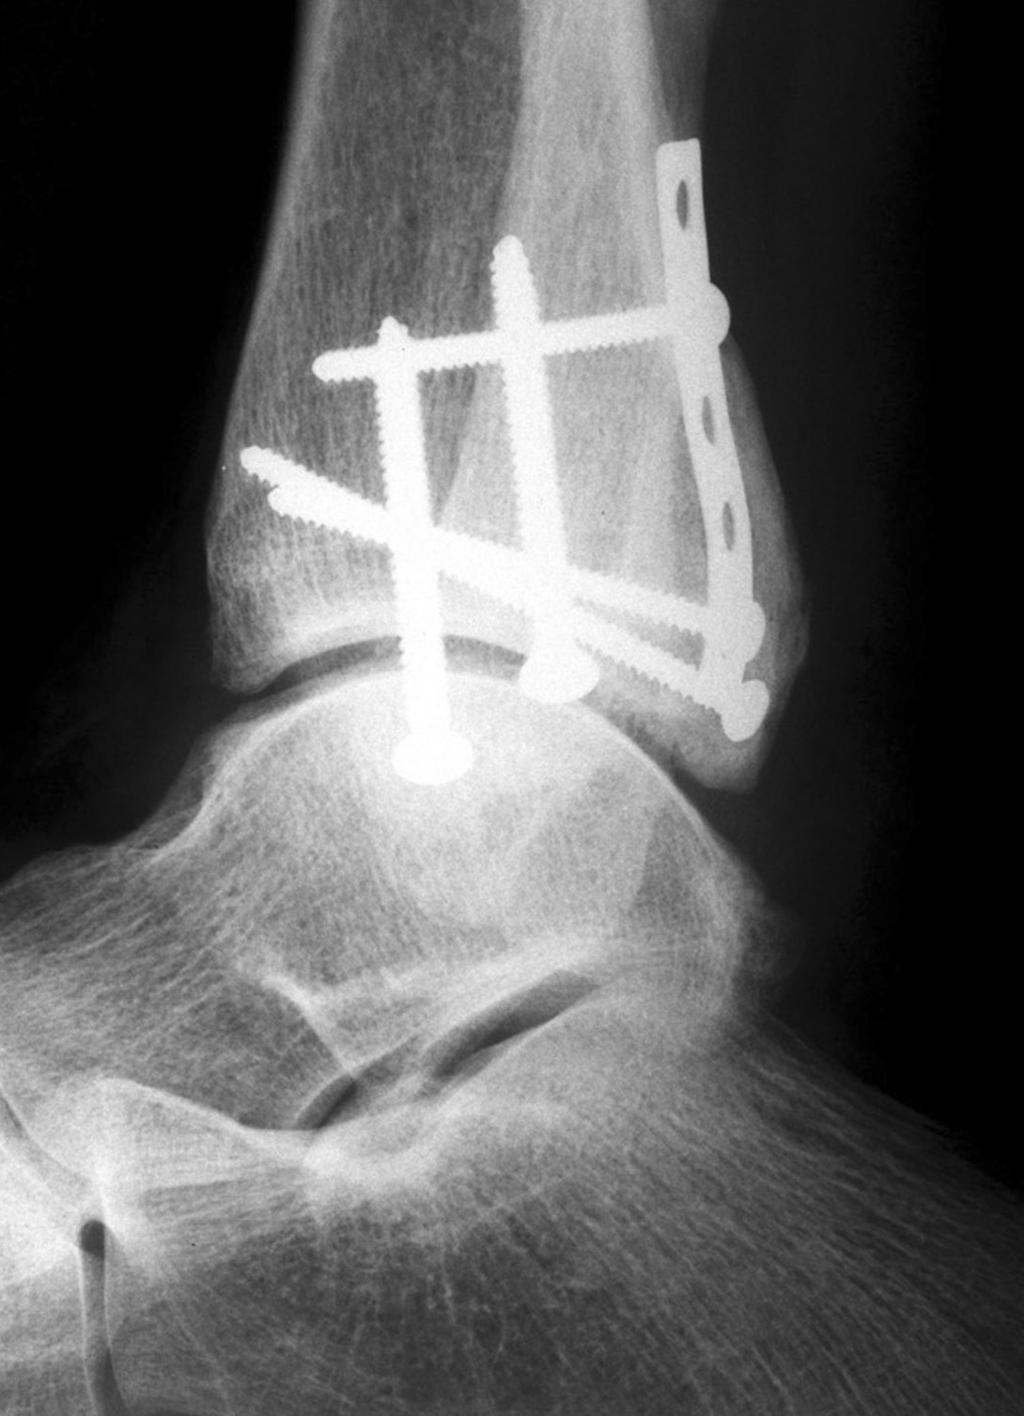 1. Geissler, WB; Tsao, AK; Hughes, JL: Fractures and injuries of the ankle. In: Rockwood CA, Green DP, Bucholz RW, Heckman JD, eds. Fractures in adults. 4 th ed.